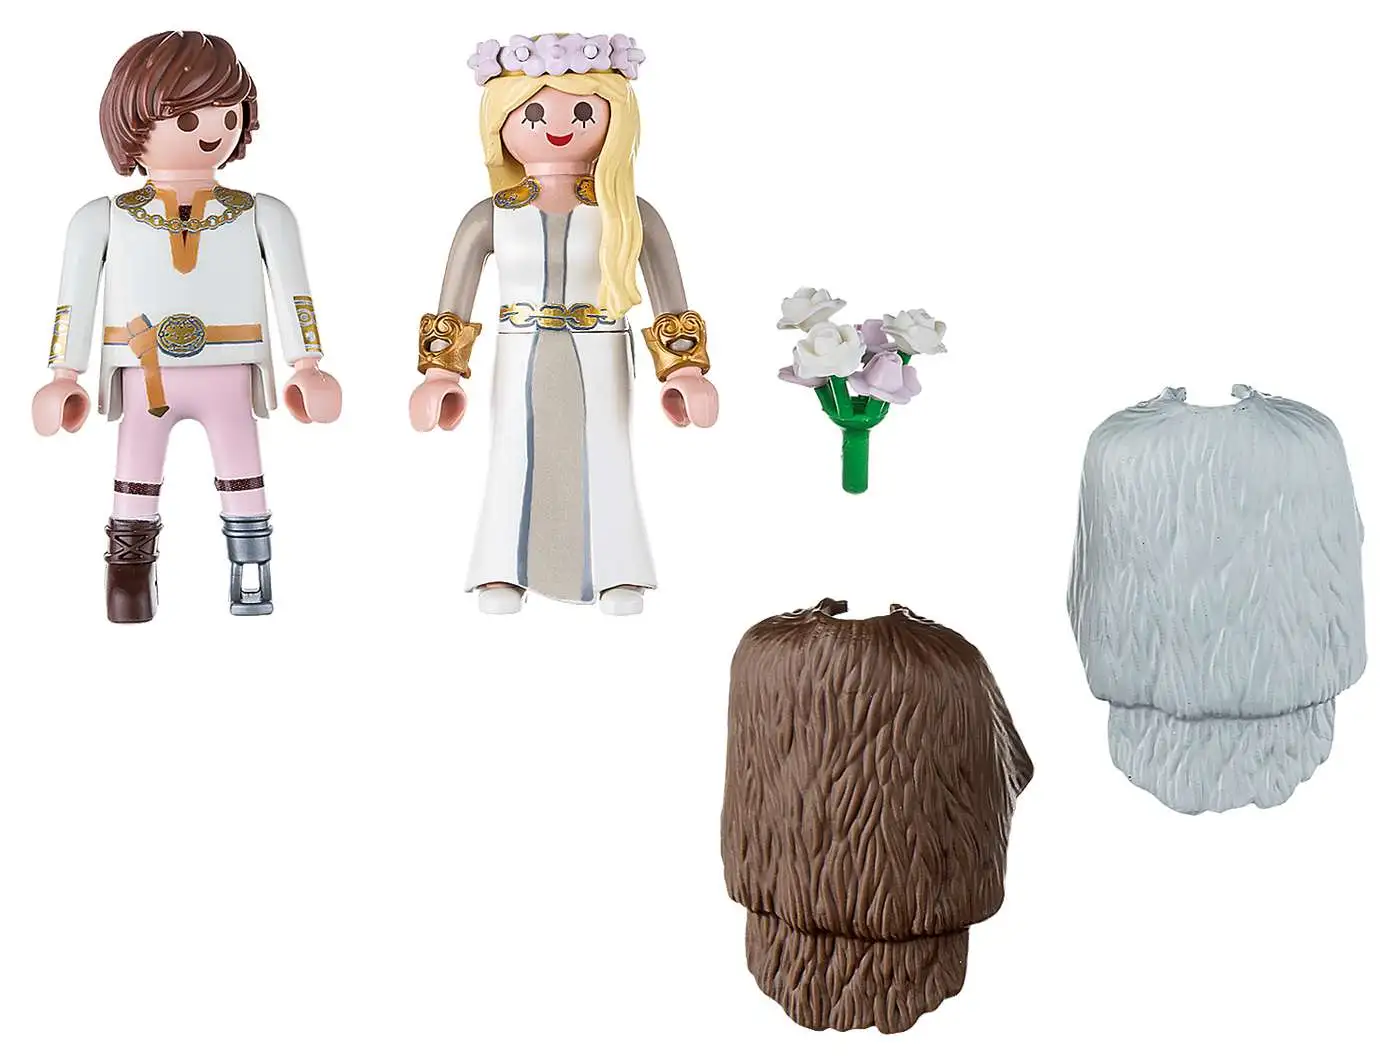 Astrid and Hiccup sheep oveja Hicks medieval Playmobil How to train your dragon 